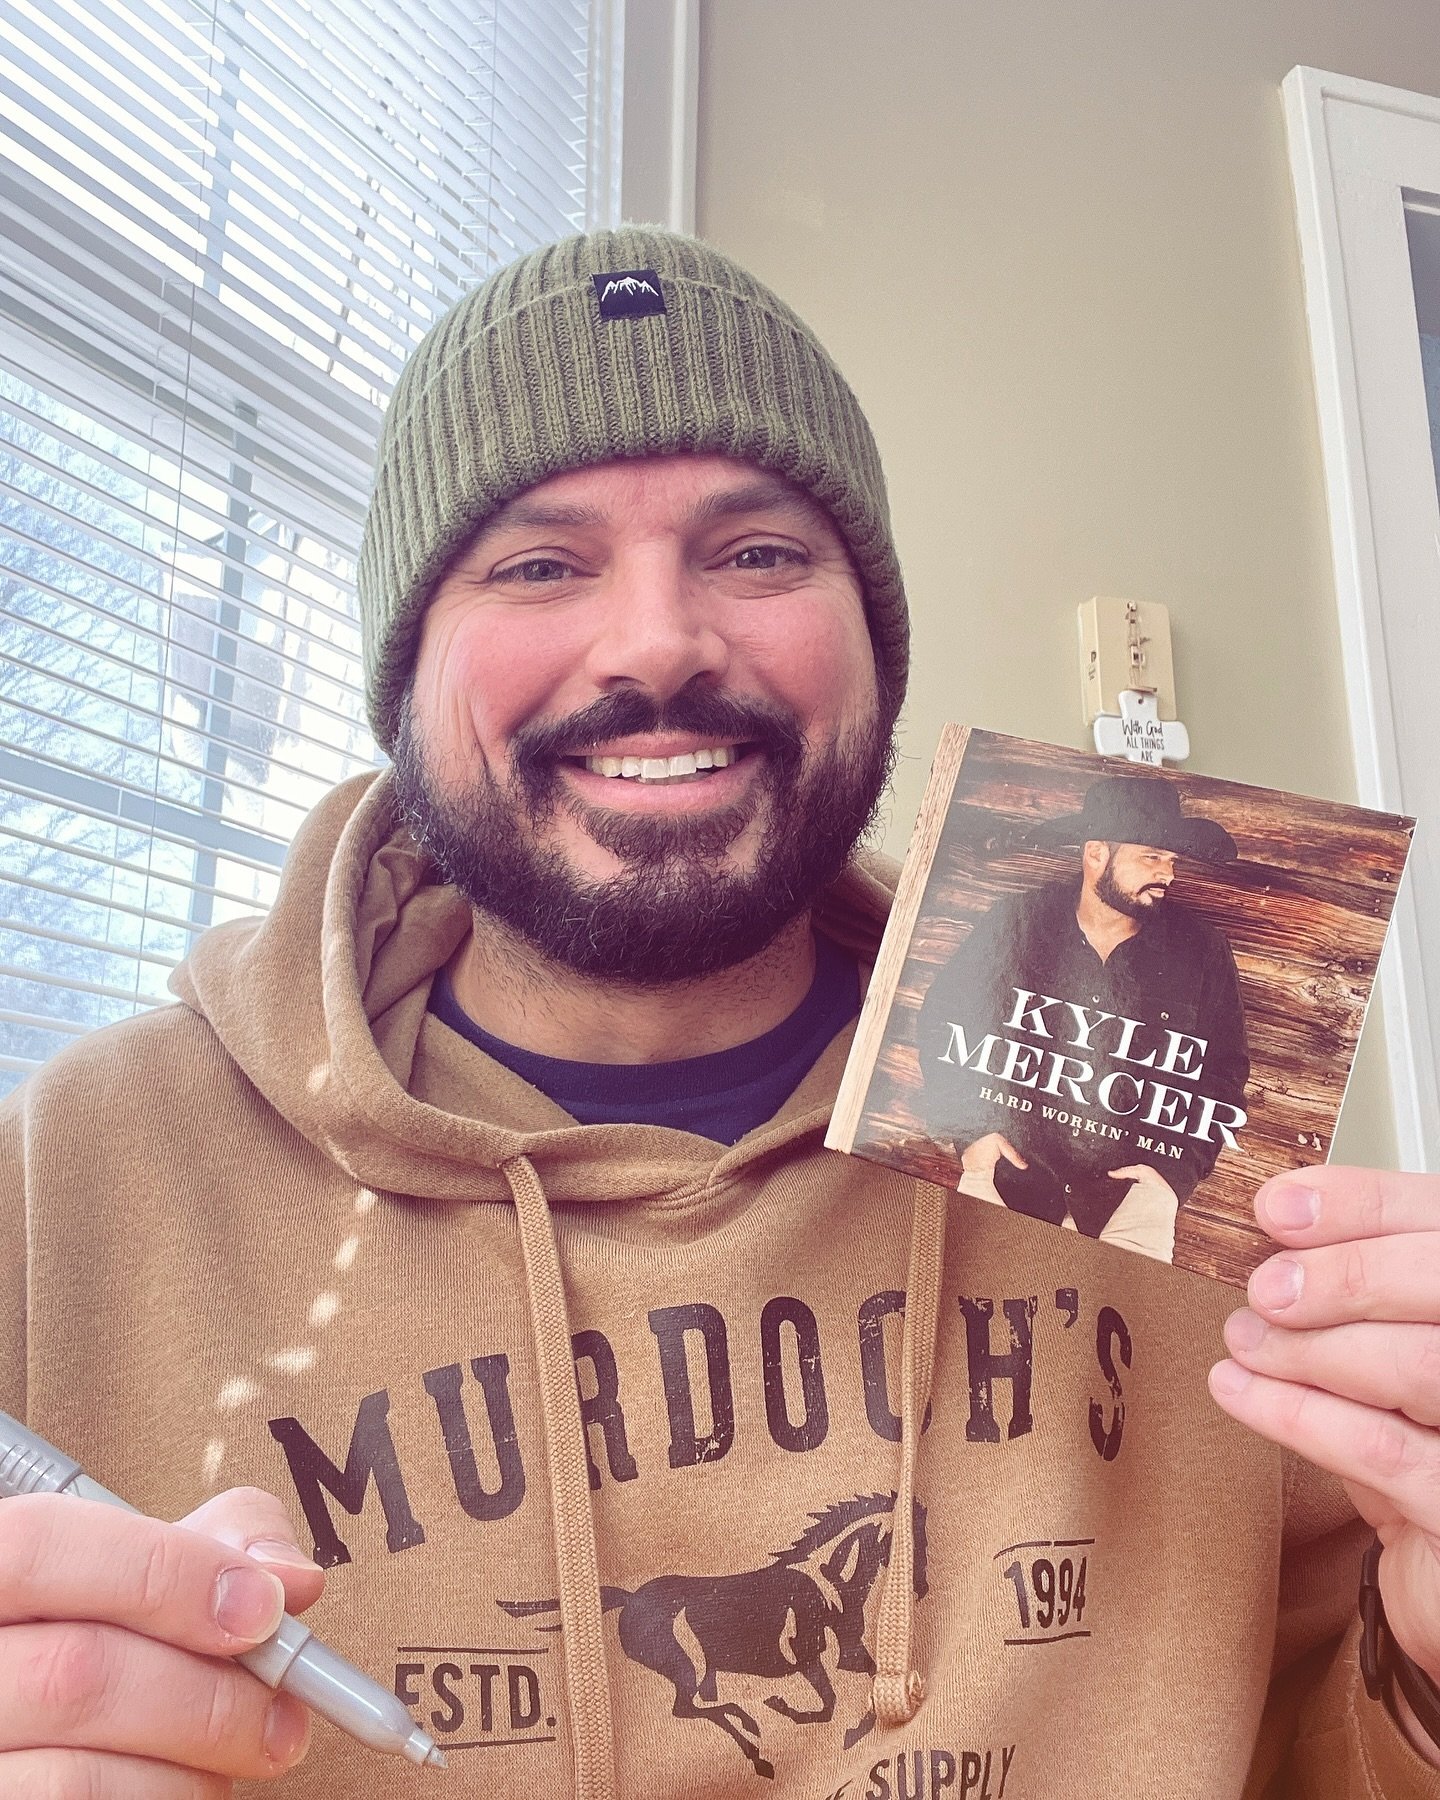 Early morning Autograph session 🎶 I&rsquo;ll be sending out the first round of orders for my new album today! If you haven&rsquo;t ordered your autographed copy head over to kylemercermusic.com and get yours🙌 🤠 Thanks for your support and loving m